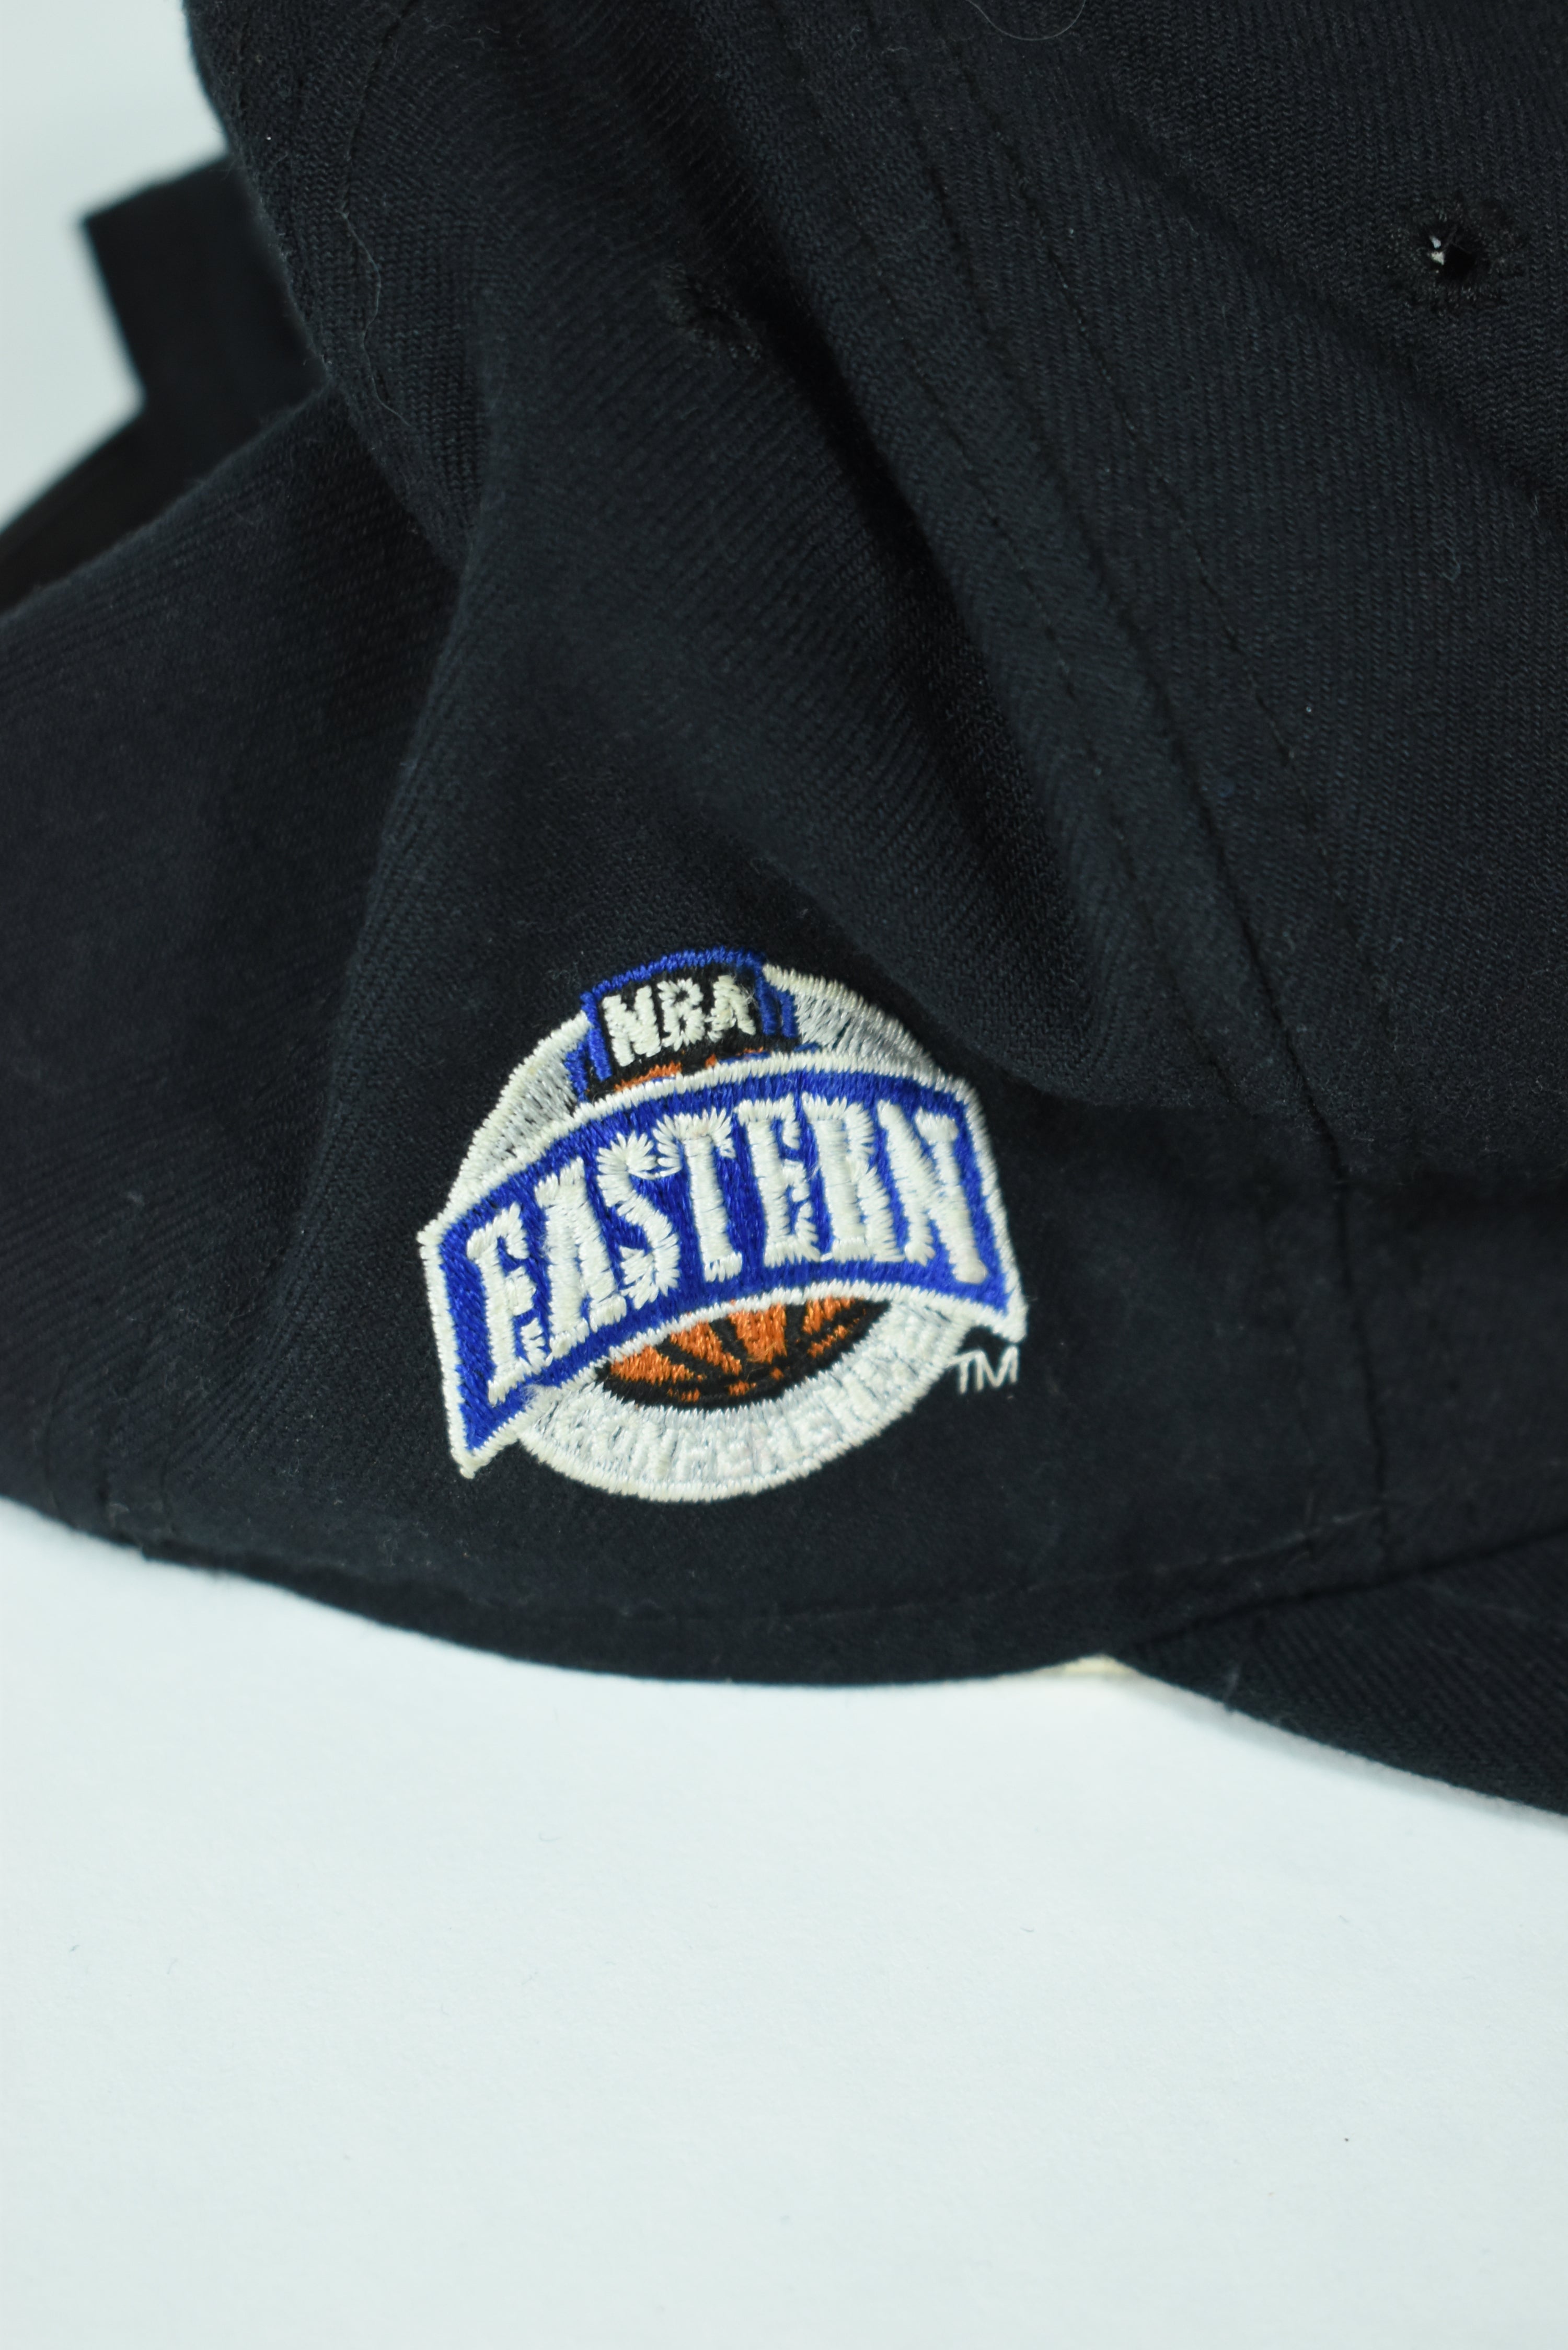 Vintage Magic 95 East Conference Champions Hat